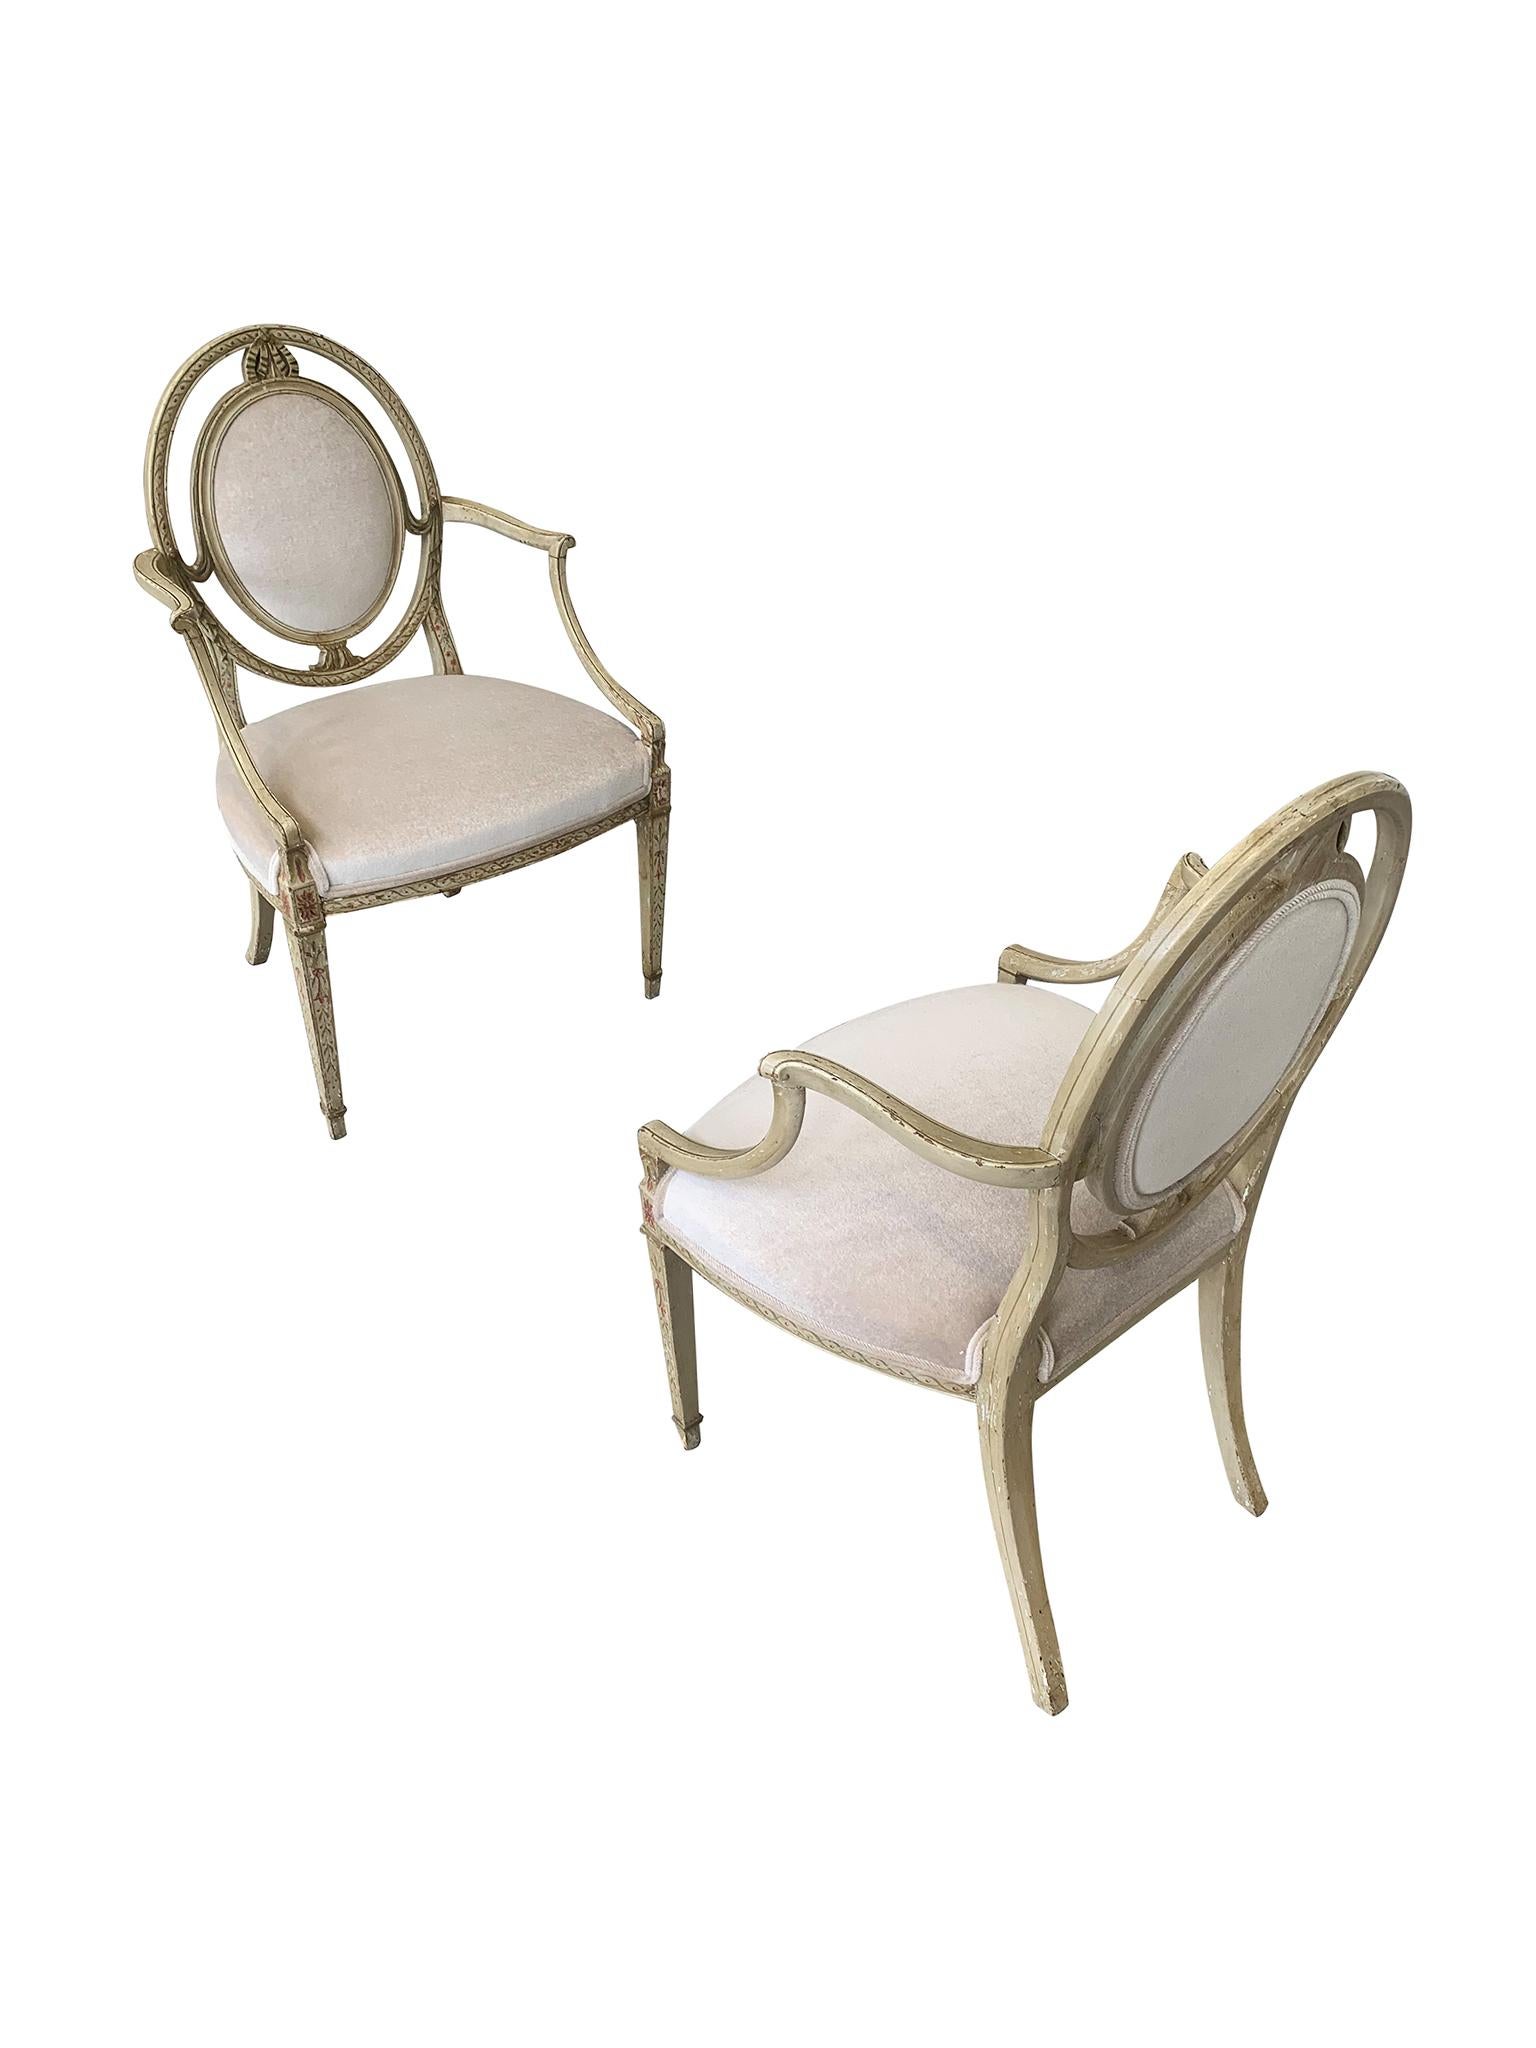 Hand-Crafted Pair of Antique Hand-Painted Gustavian Armchairs